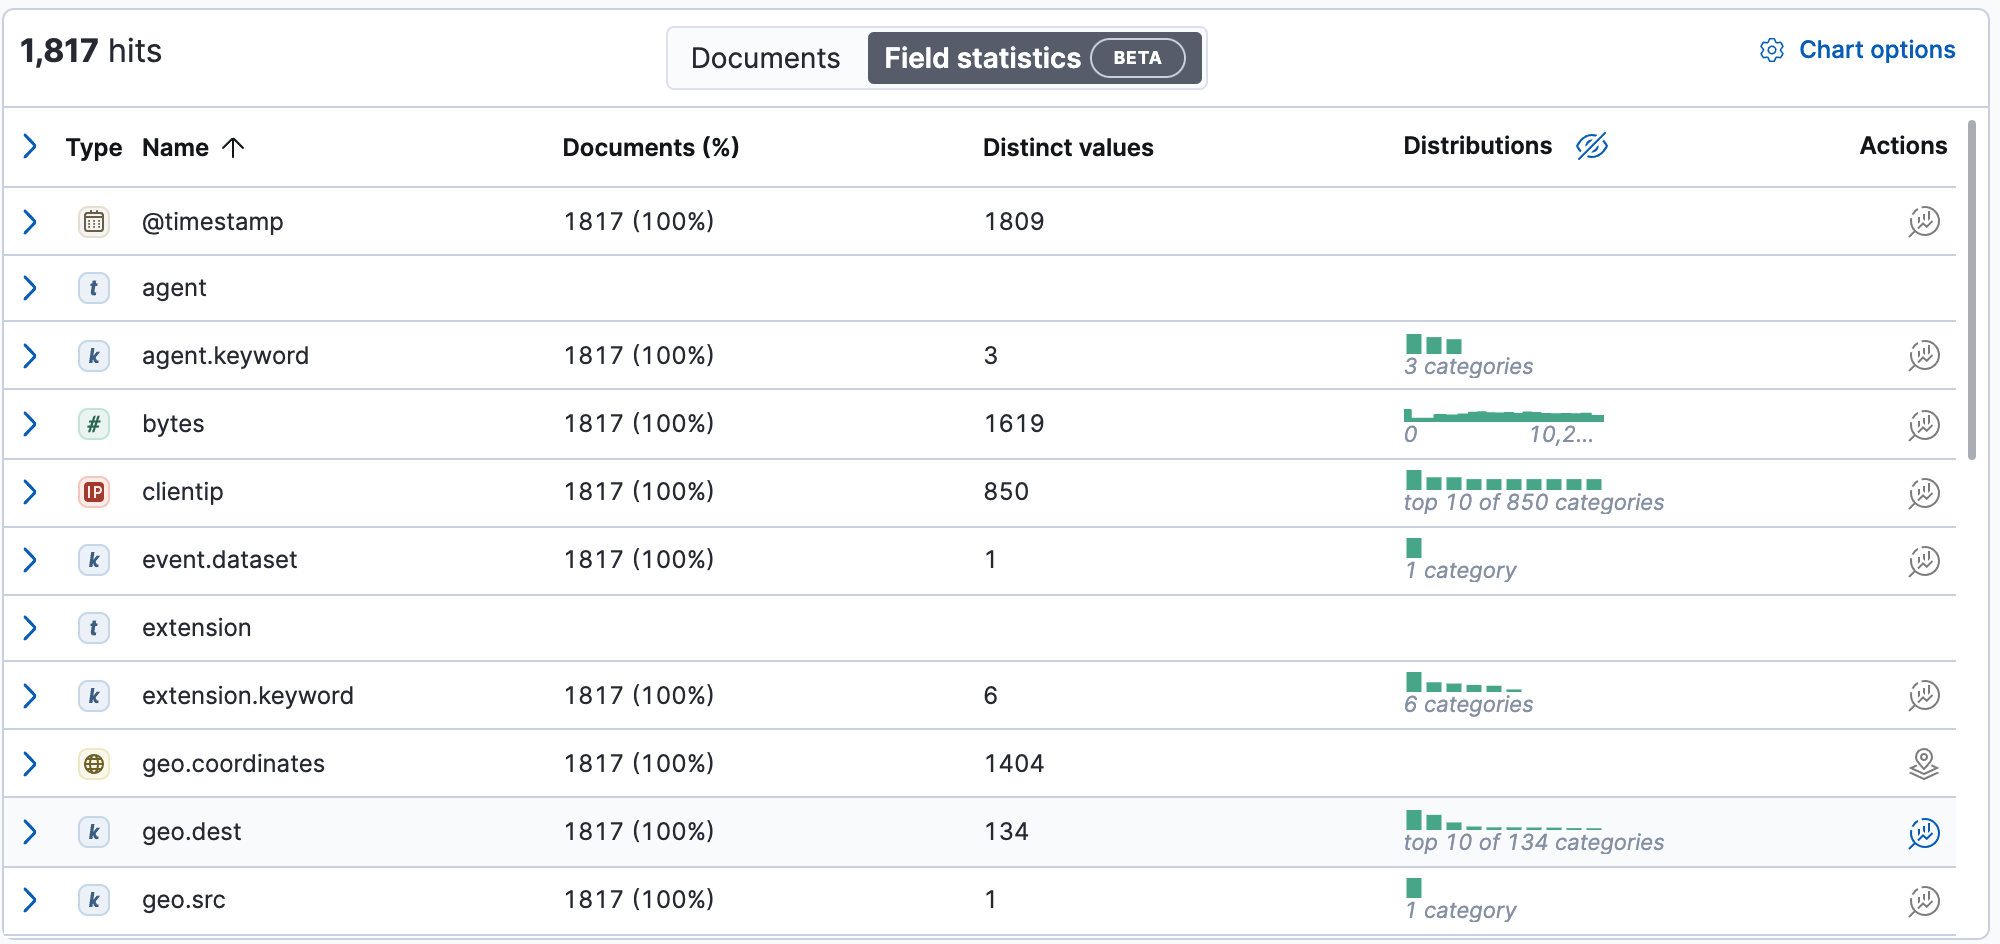 Field statistics view in Discover showing a summary of document data.